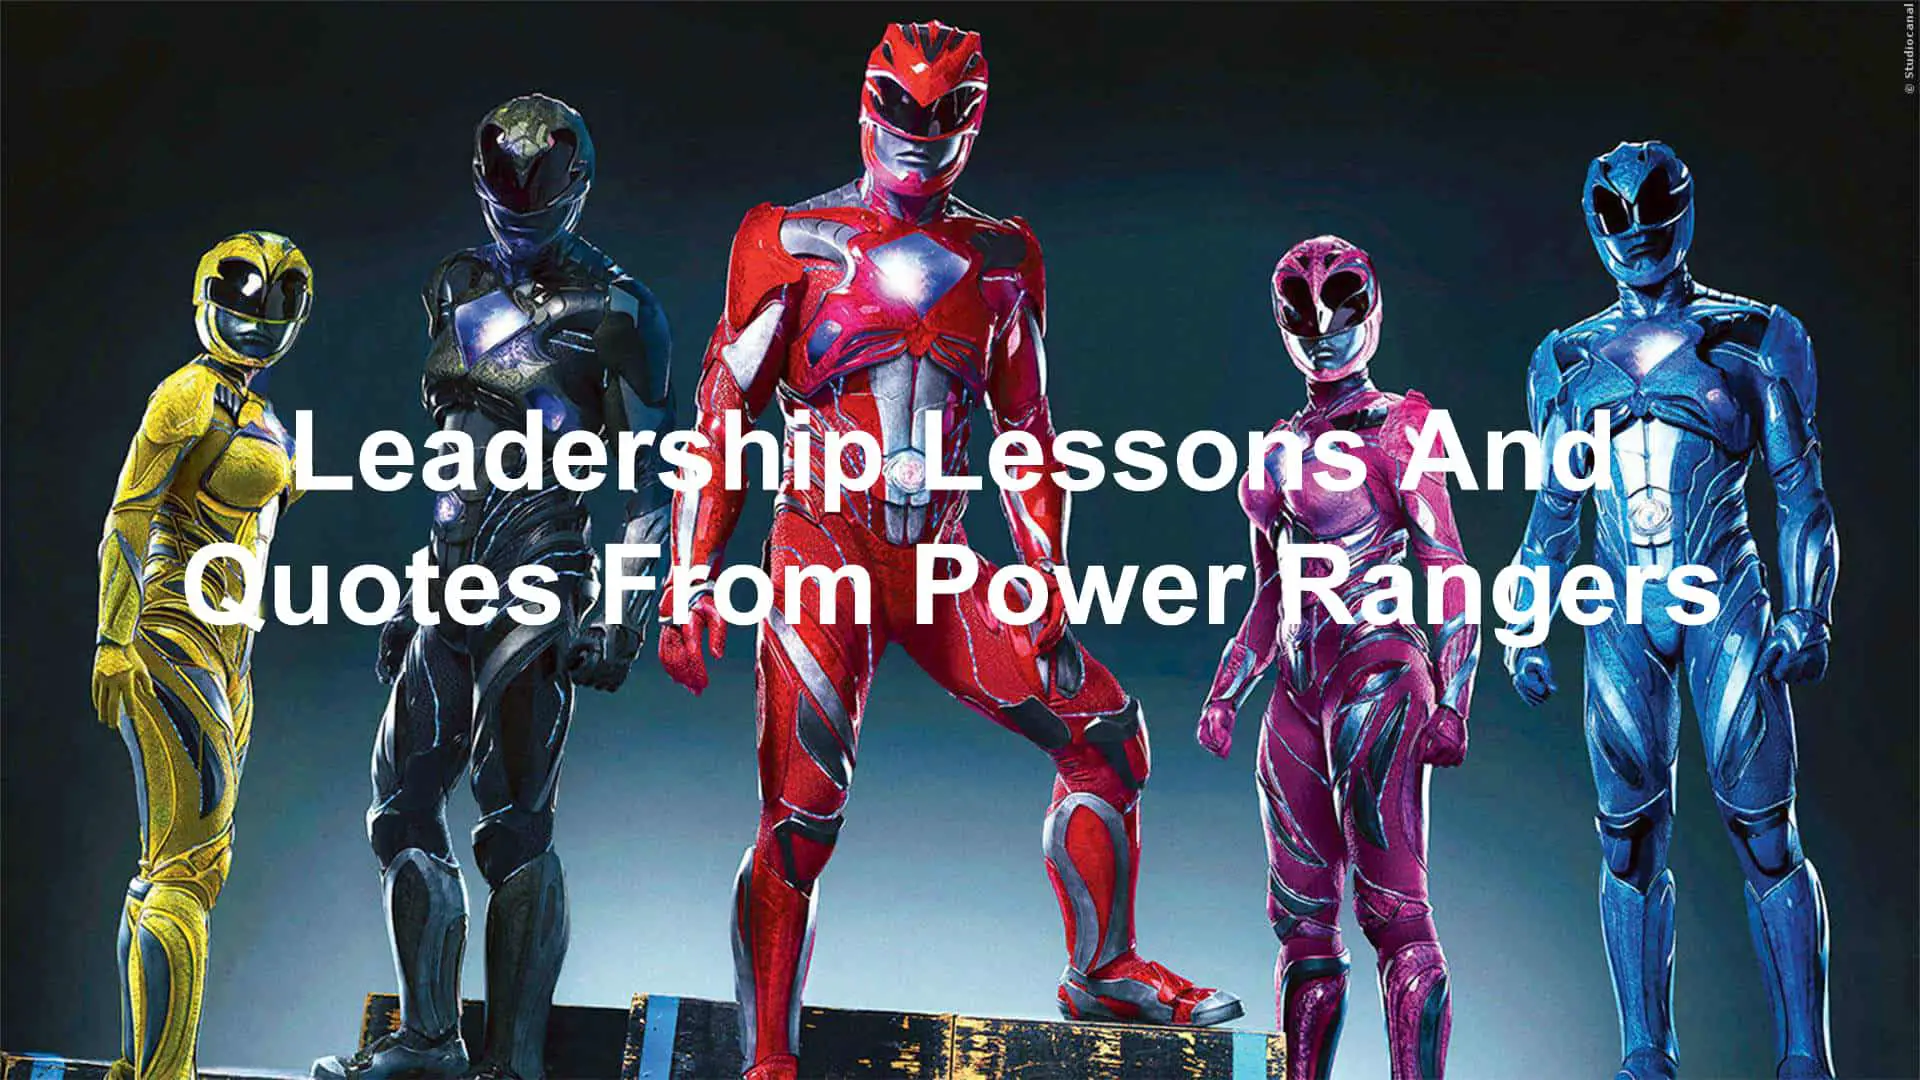 Leadership Lessons And Quotes From Power Rangers